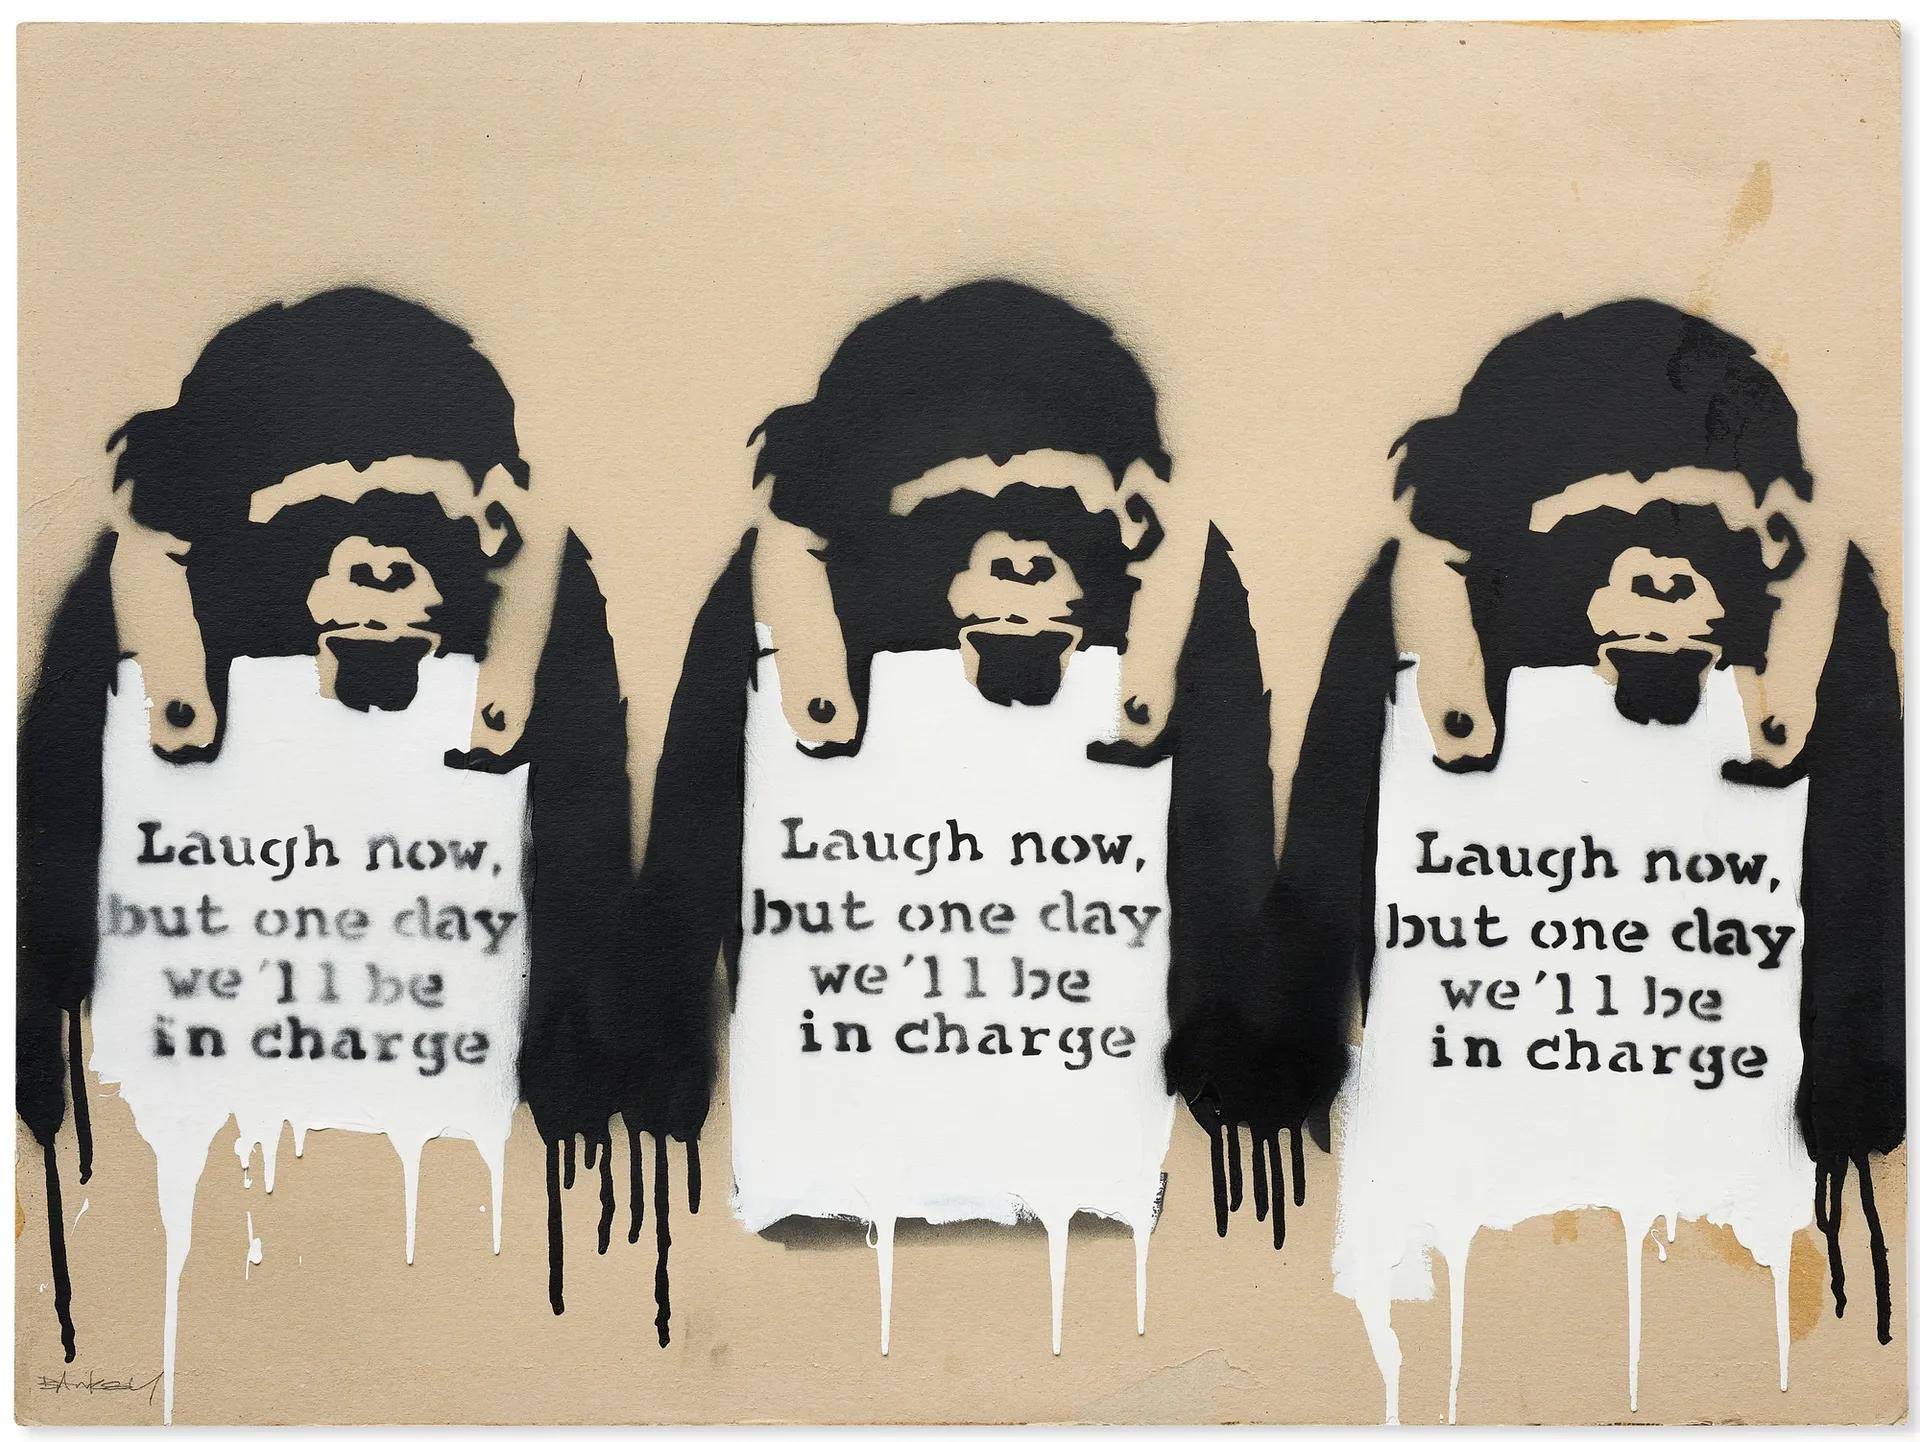 Banksy's Laugh Now But One Day We'll Be In Charge (2002), sold at Christie's on 11 May for $2.1m (with fees)